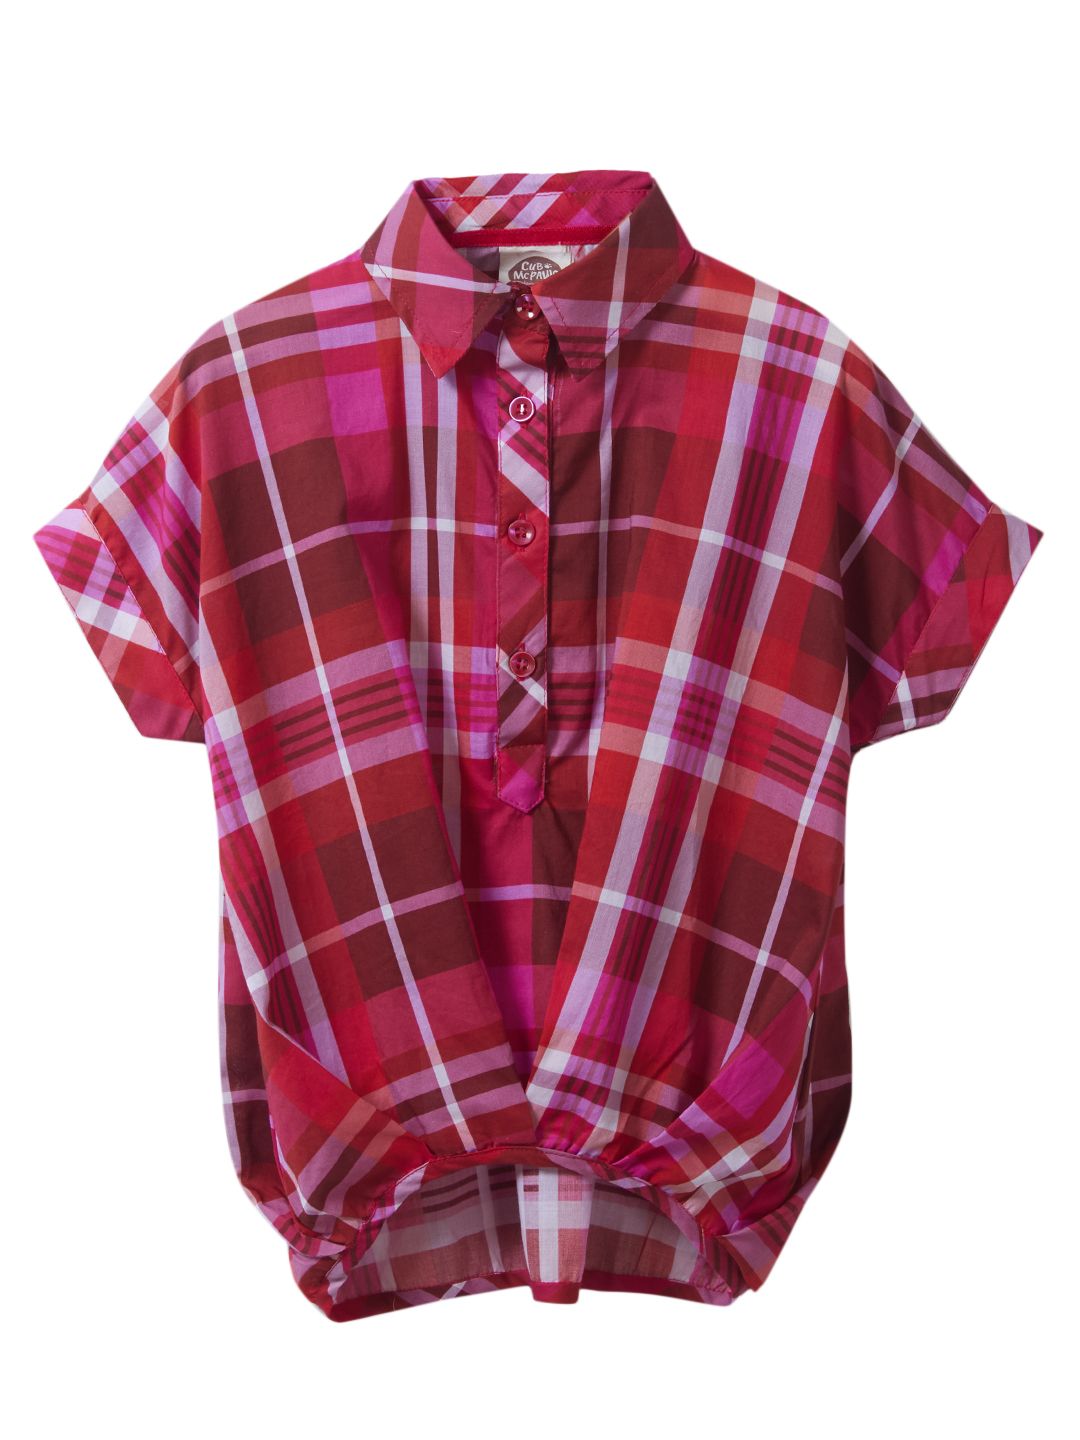 Red Checks Fashion Woven Top for Girls Age 4 to 12 Years